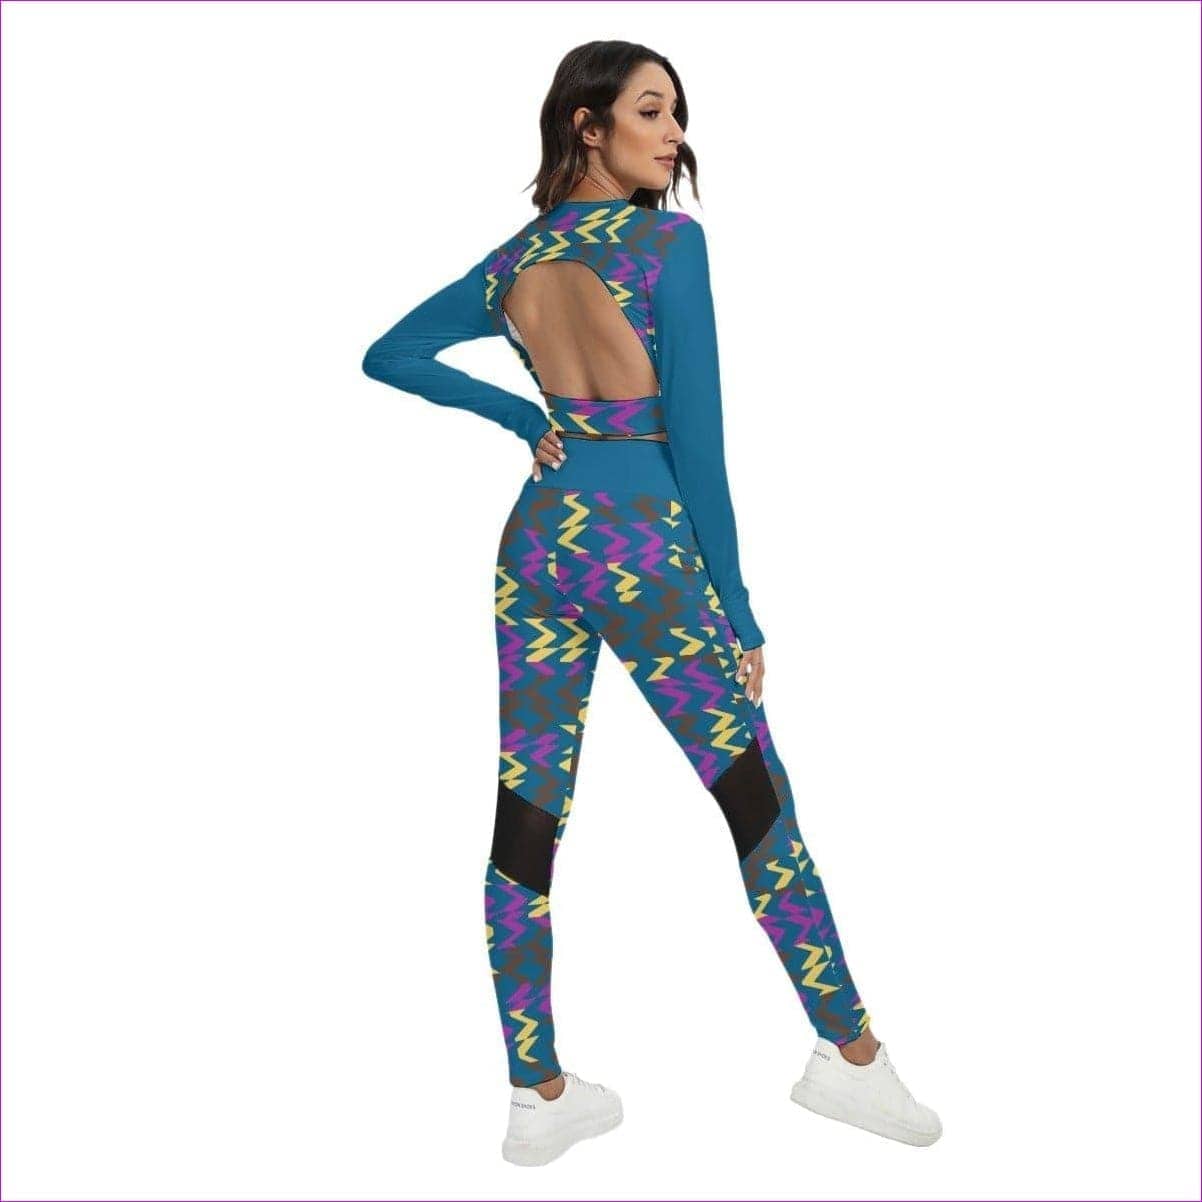 Zig & Zag Women's Sport Set With Backless Top And Leggings - women's sports set at TFC&H Co.